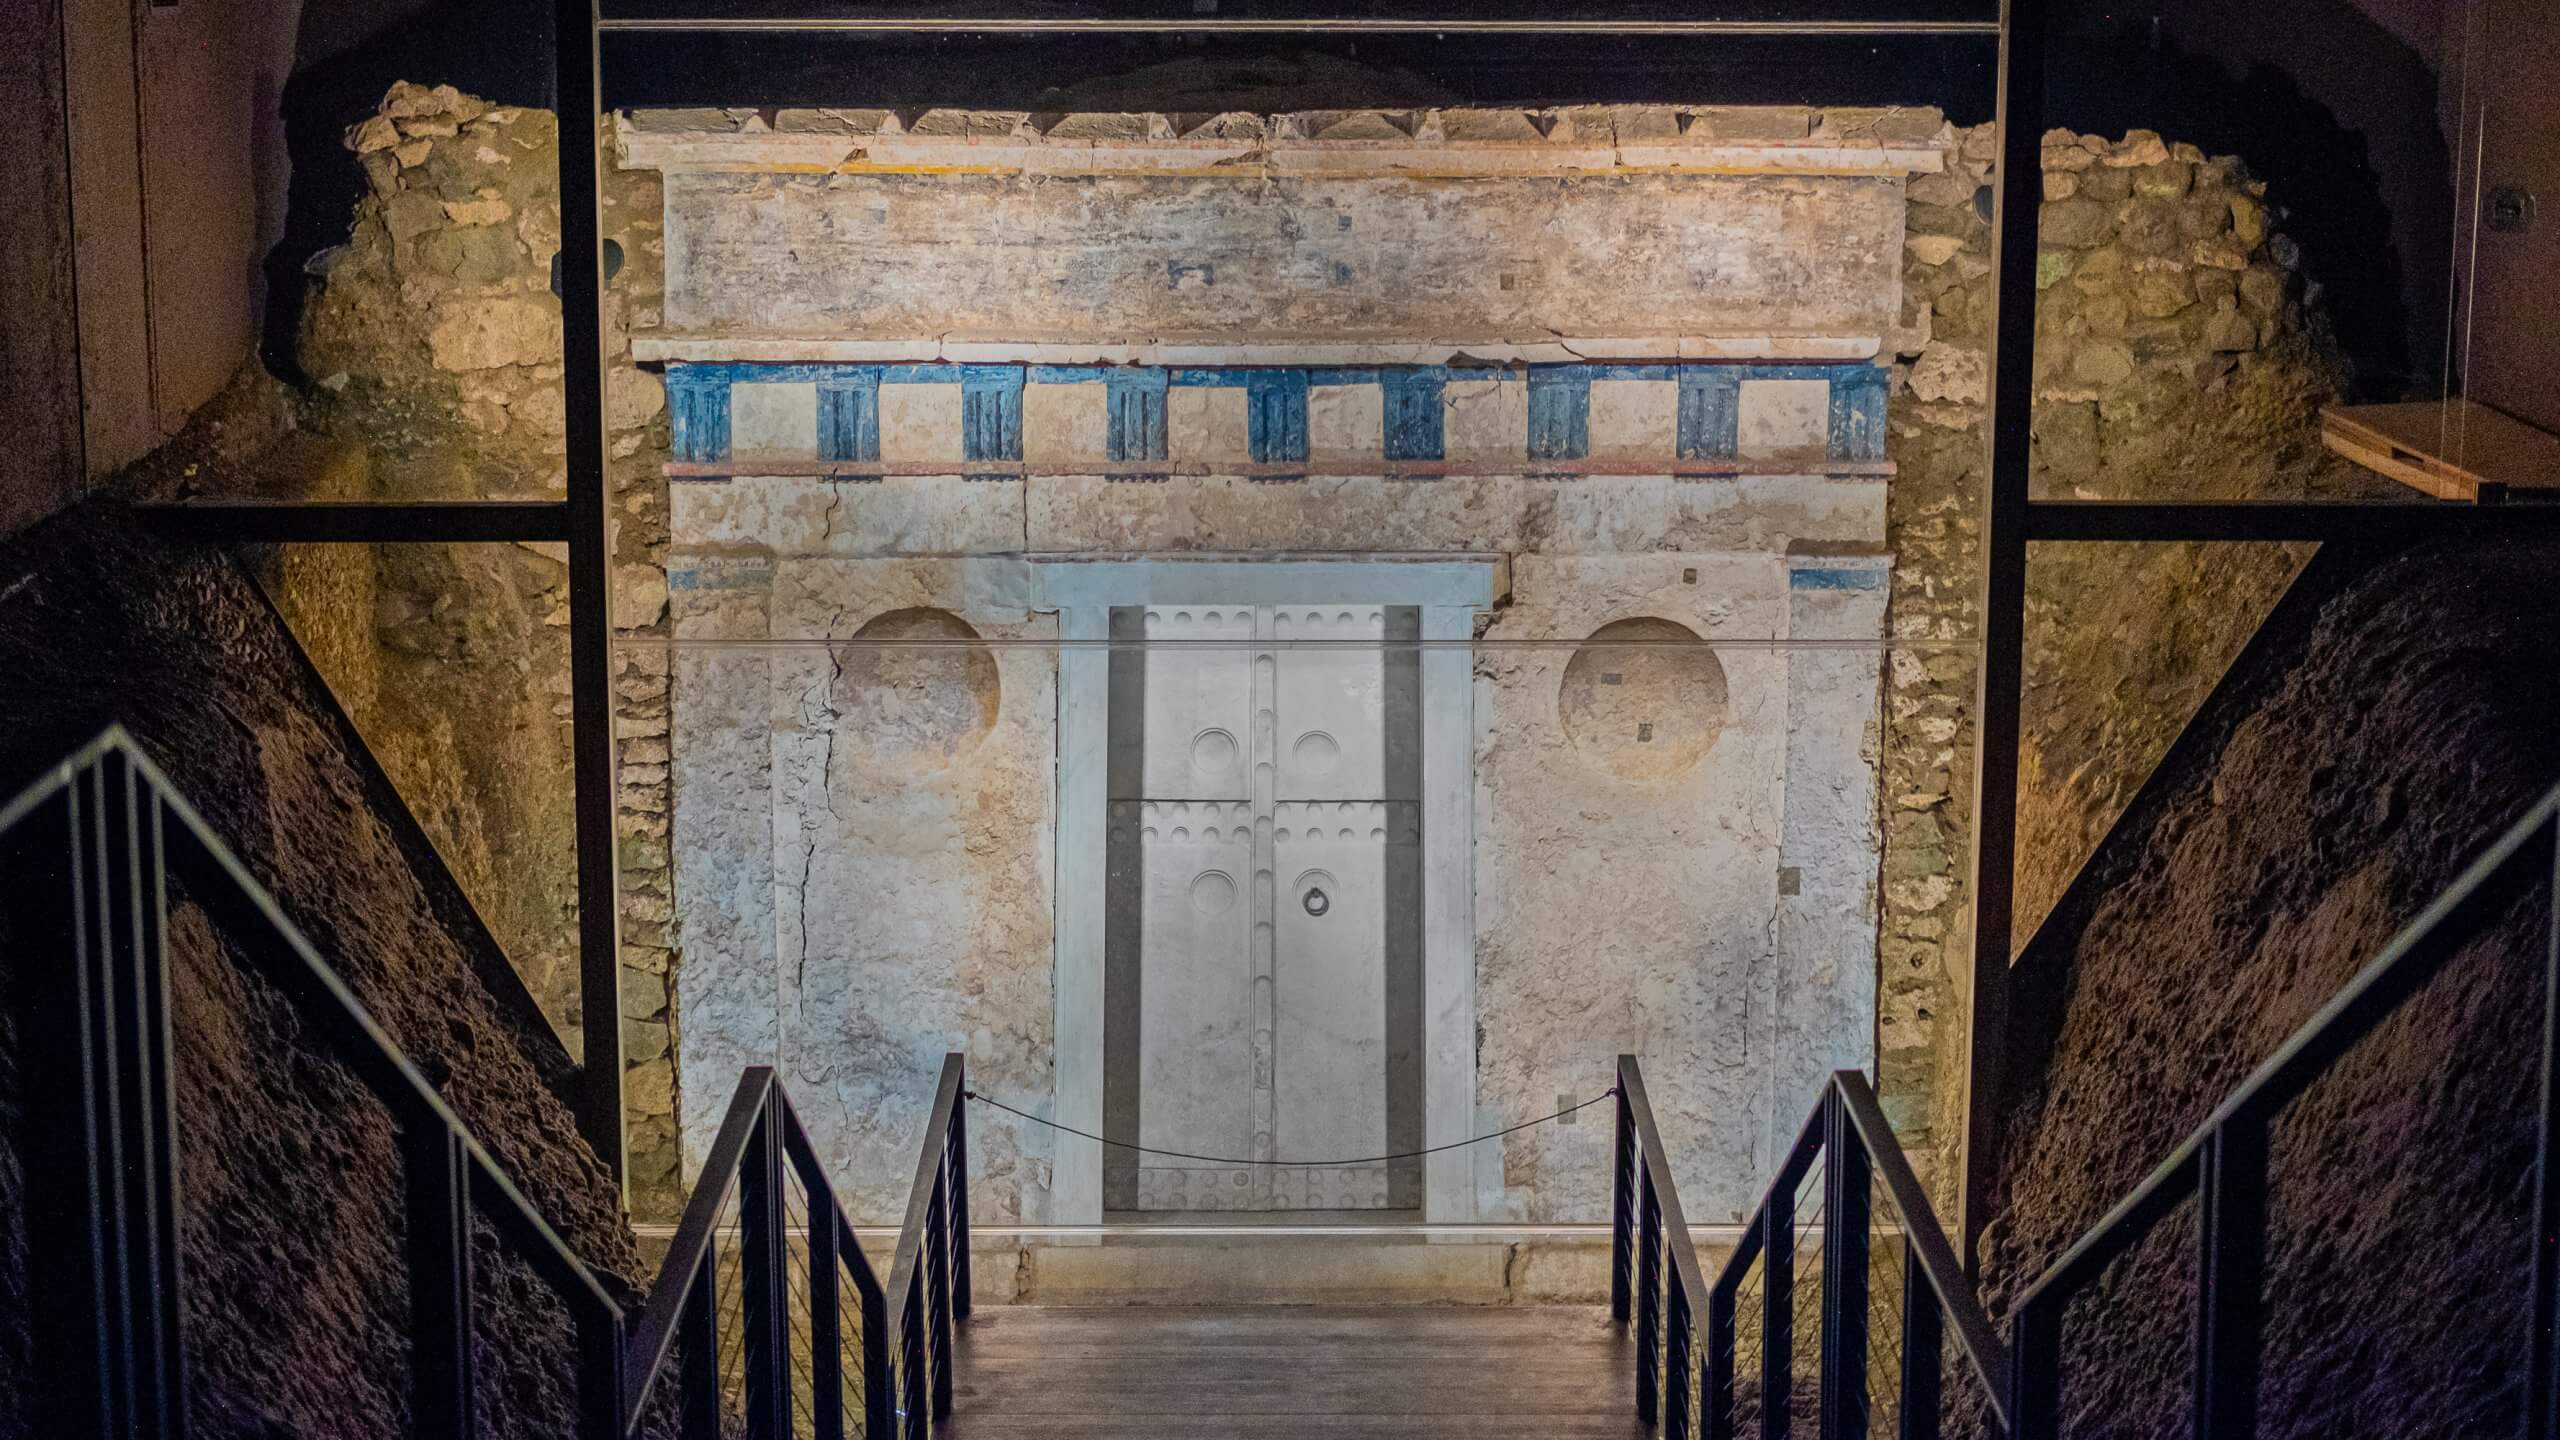 The entrance of King Philipp's tomb in Vergina